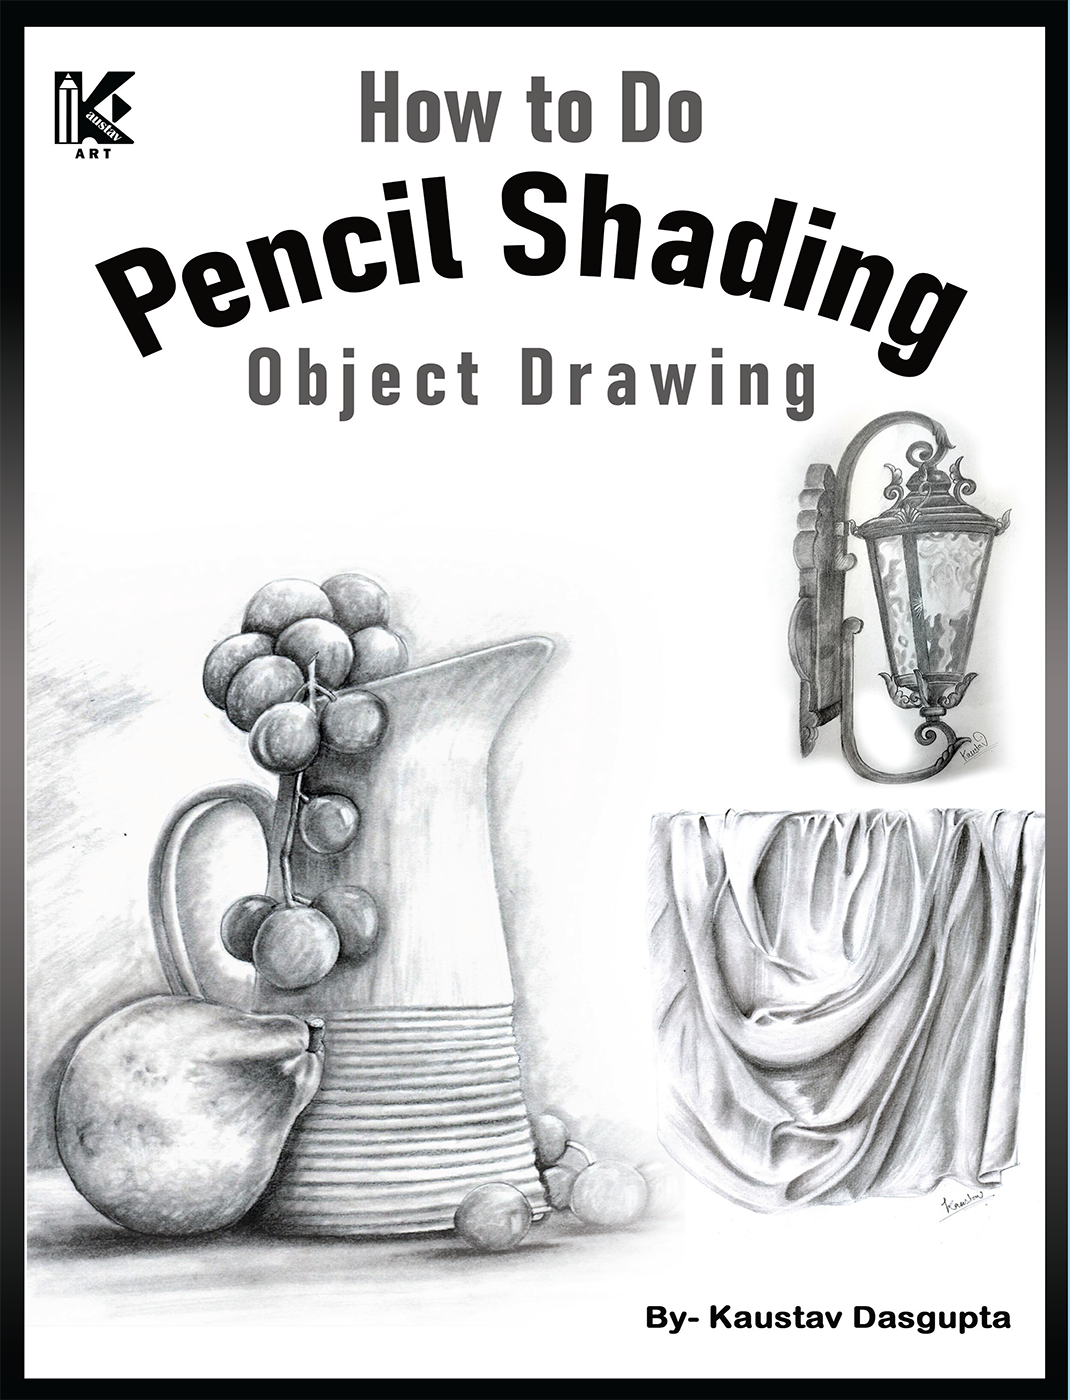 How to Draw with a Mechanical Pencil - Ran Art Blog